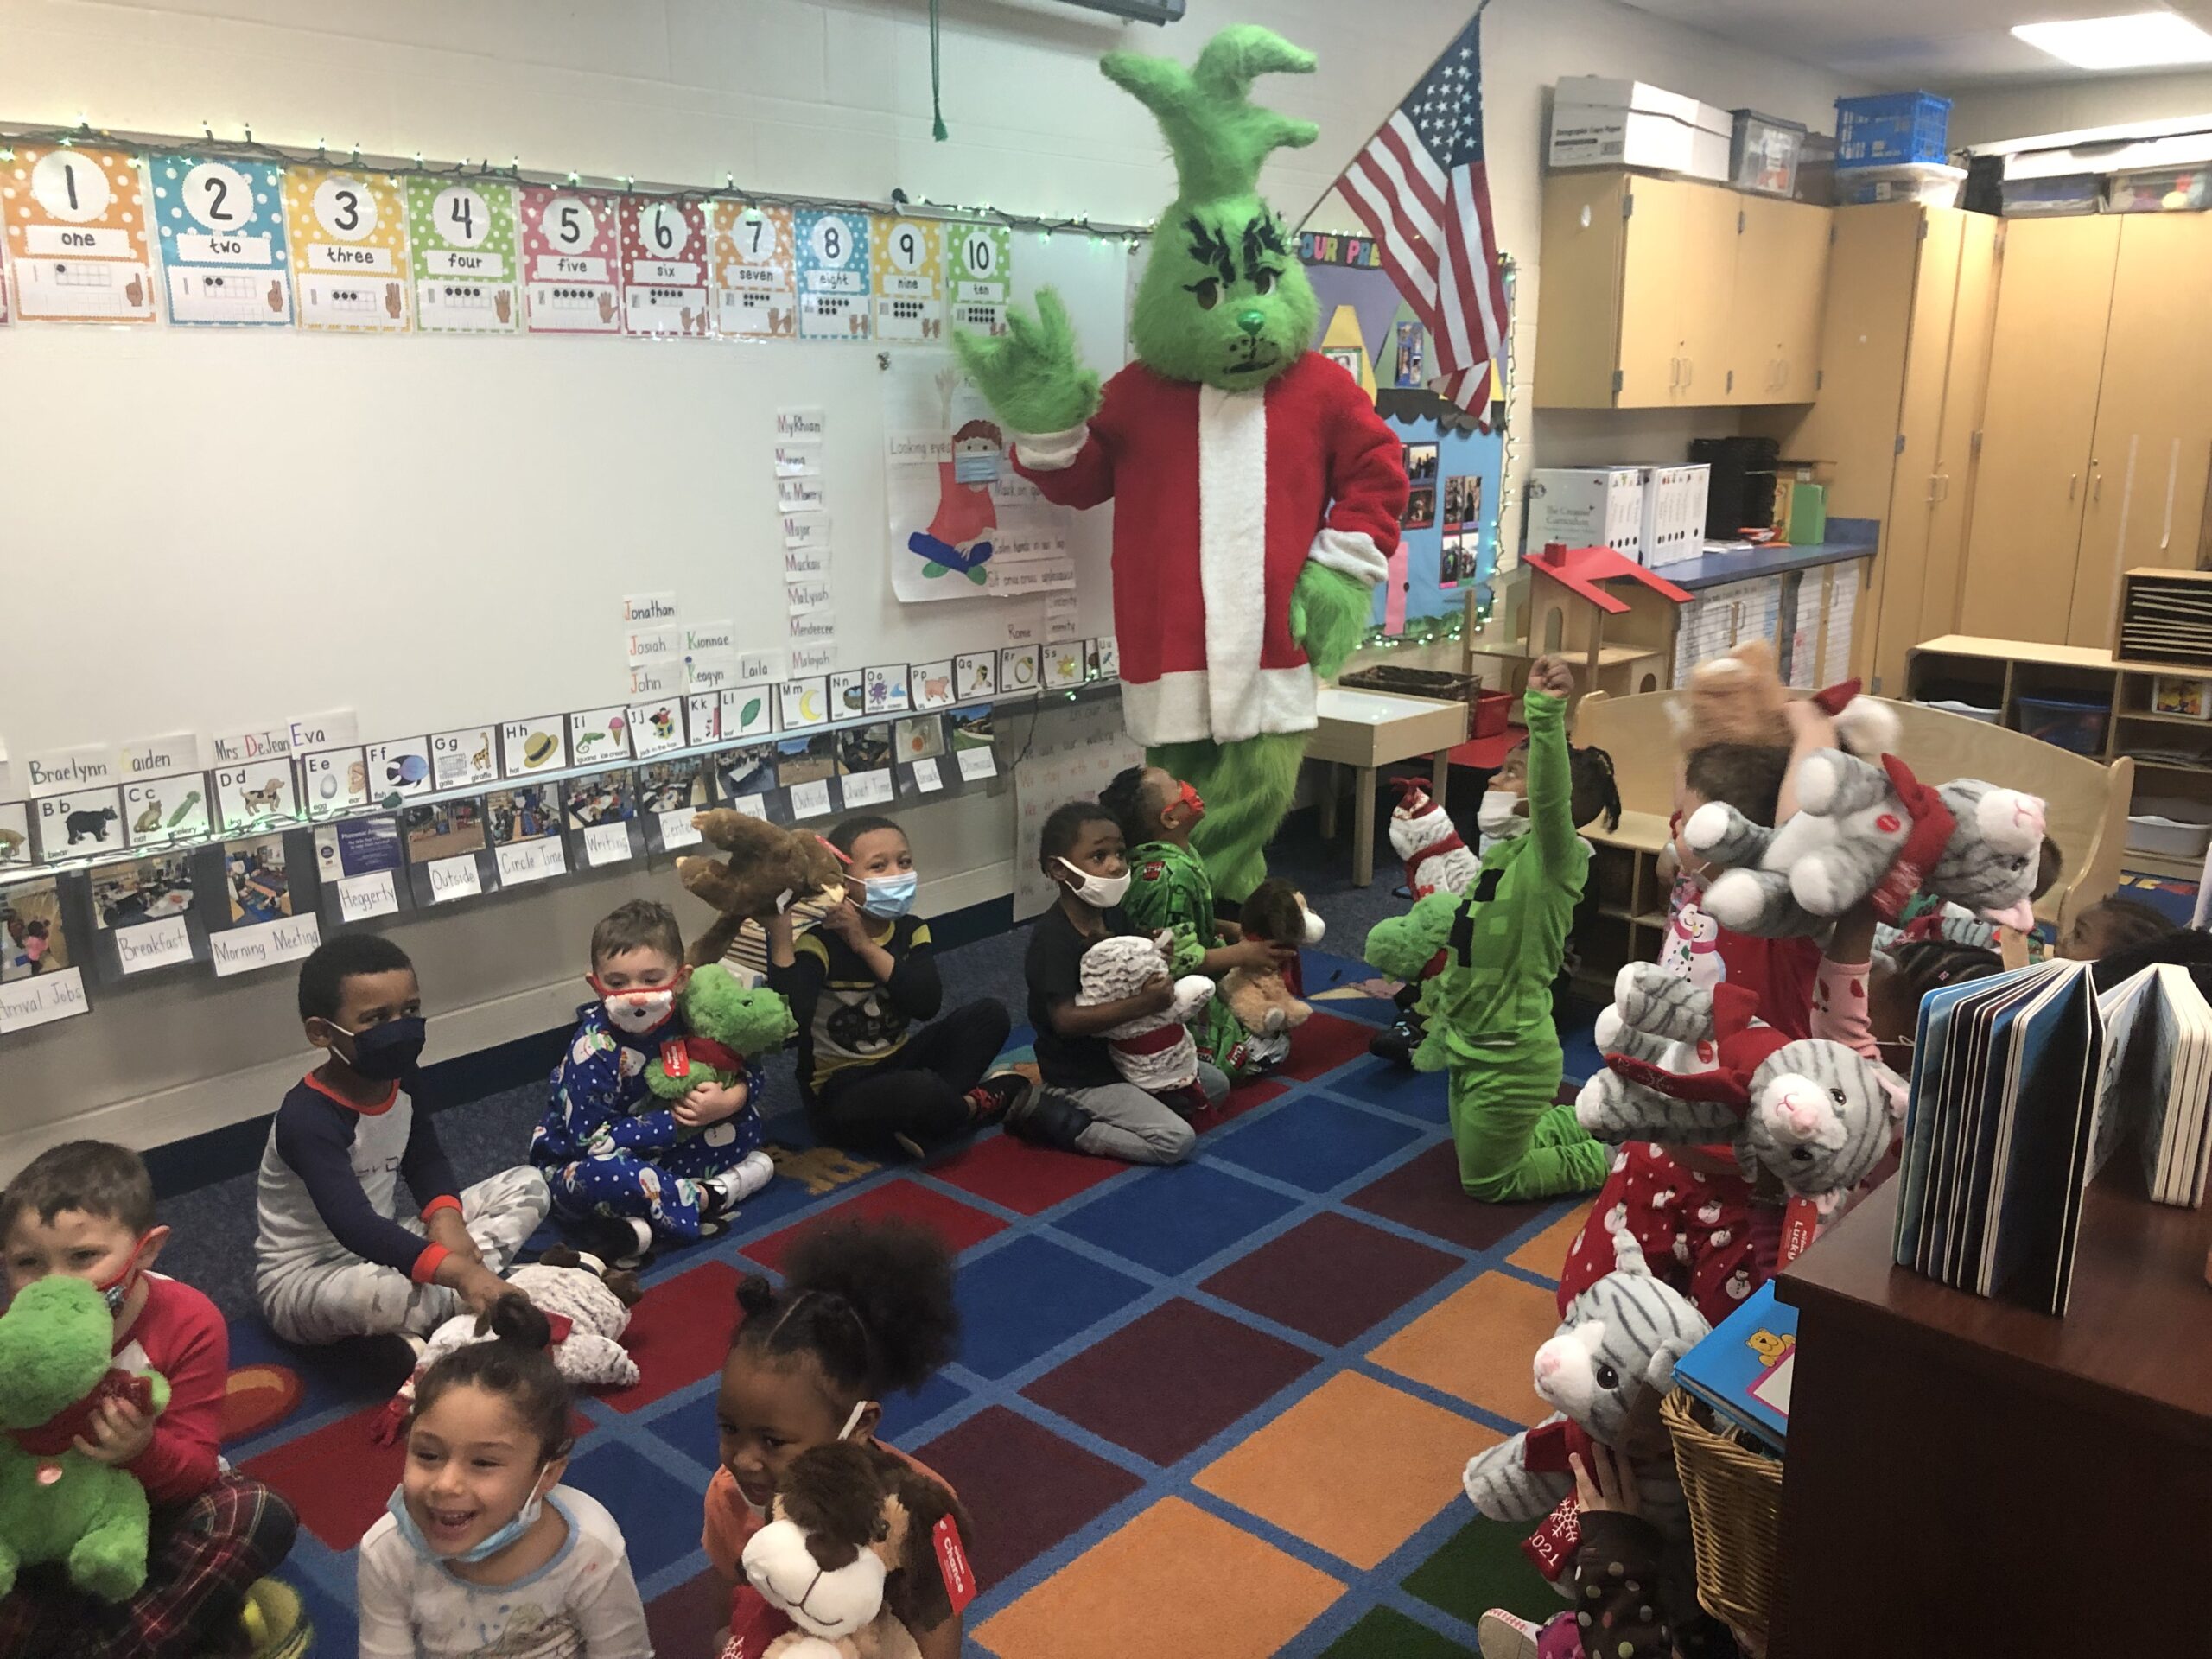 The Grinch delivers stuffed animals